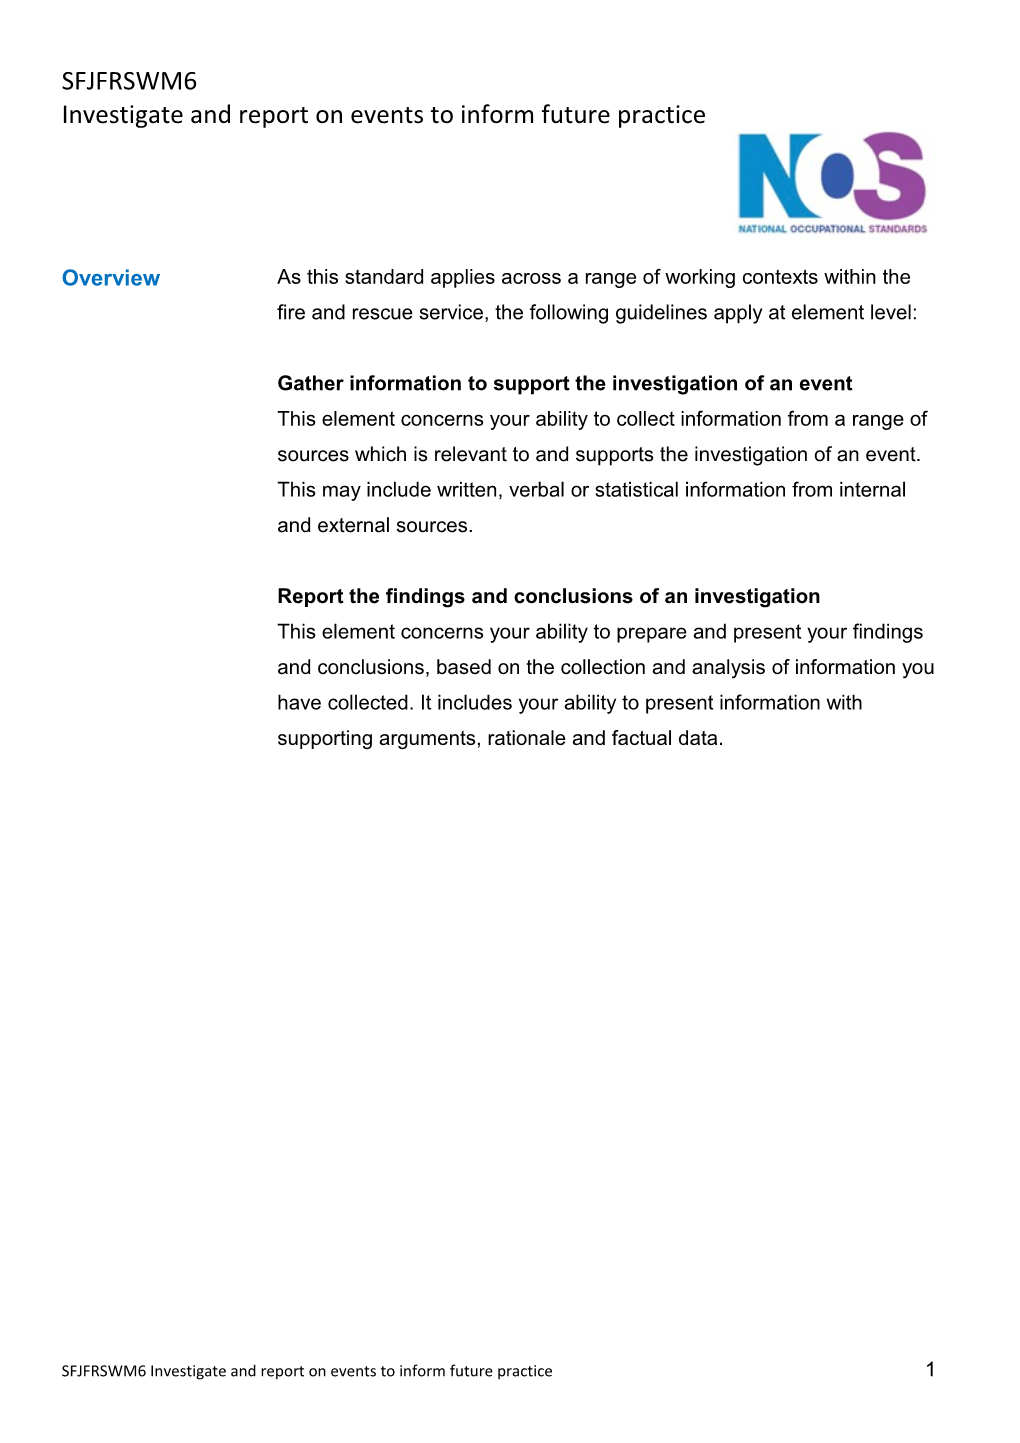 SFJFRSWM6 Investigate and Report on Events to Inform Future Practice